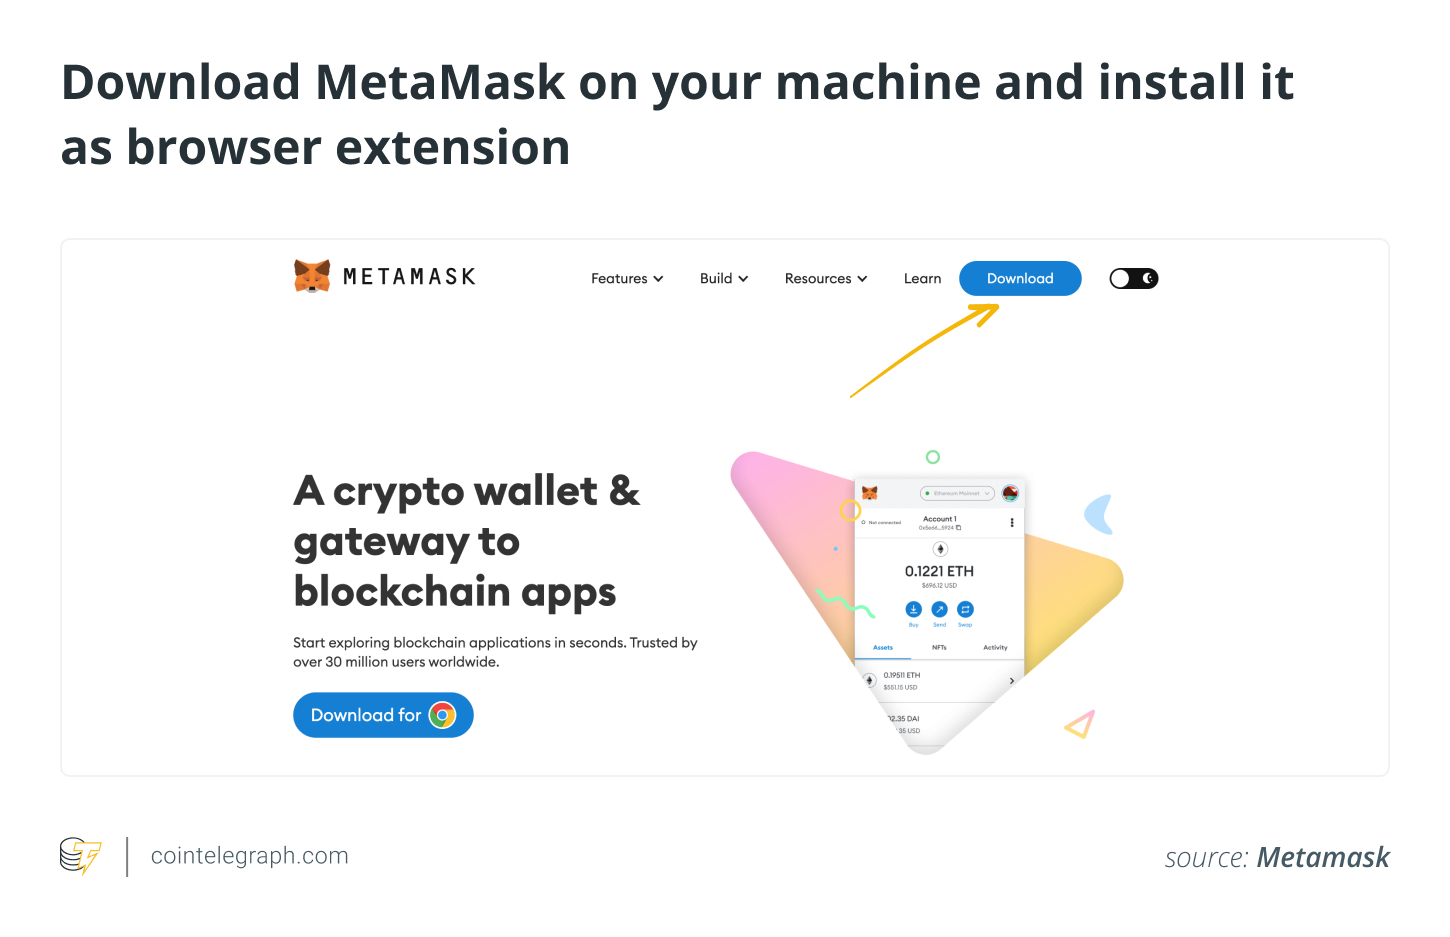 Download MetaMask on your machine and install it as browser extension